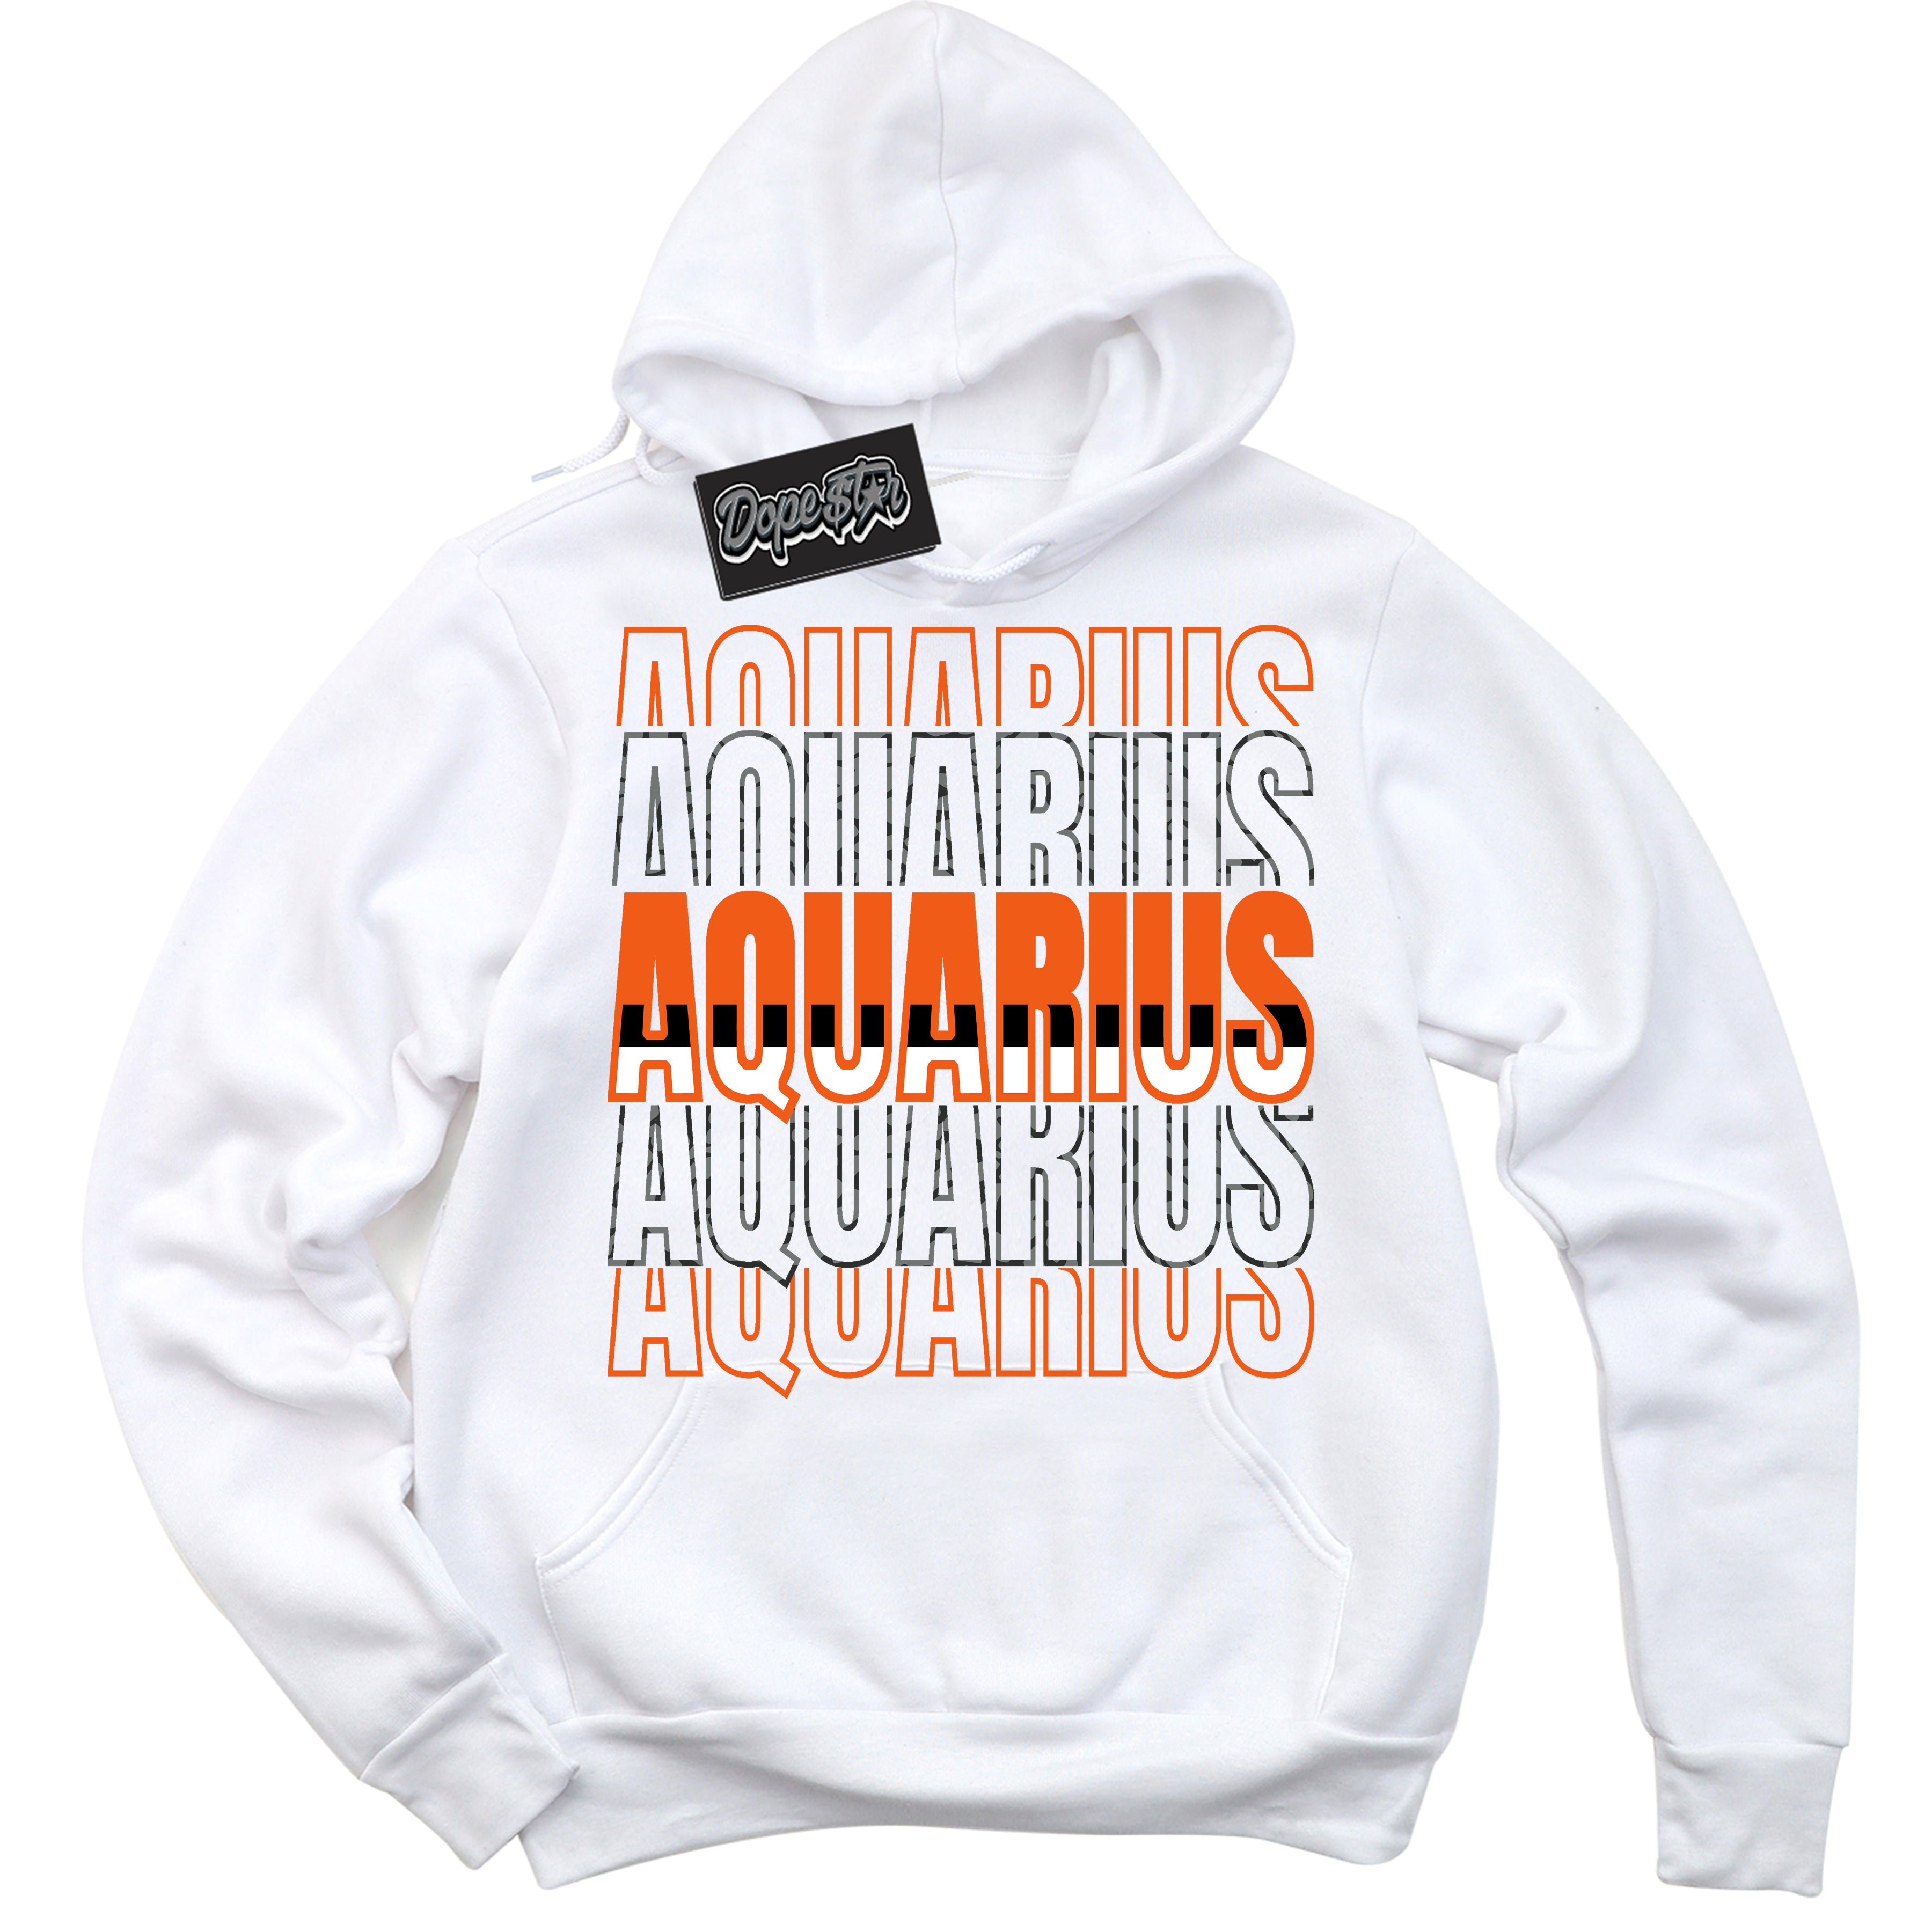 Cool White Graphic DopeStar Hoodie with “ Aquarius “ print, that perfectly matches Fear Pack 3s sneakers